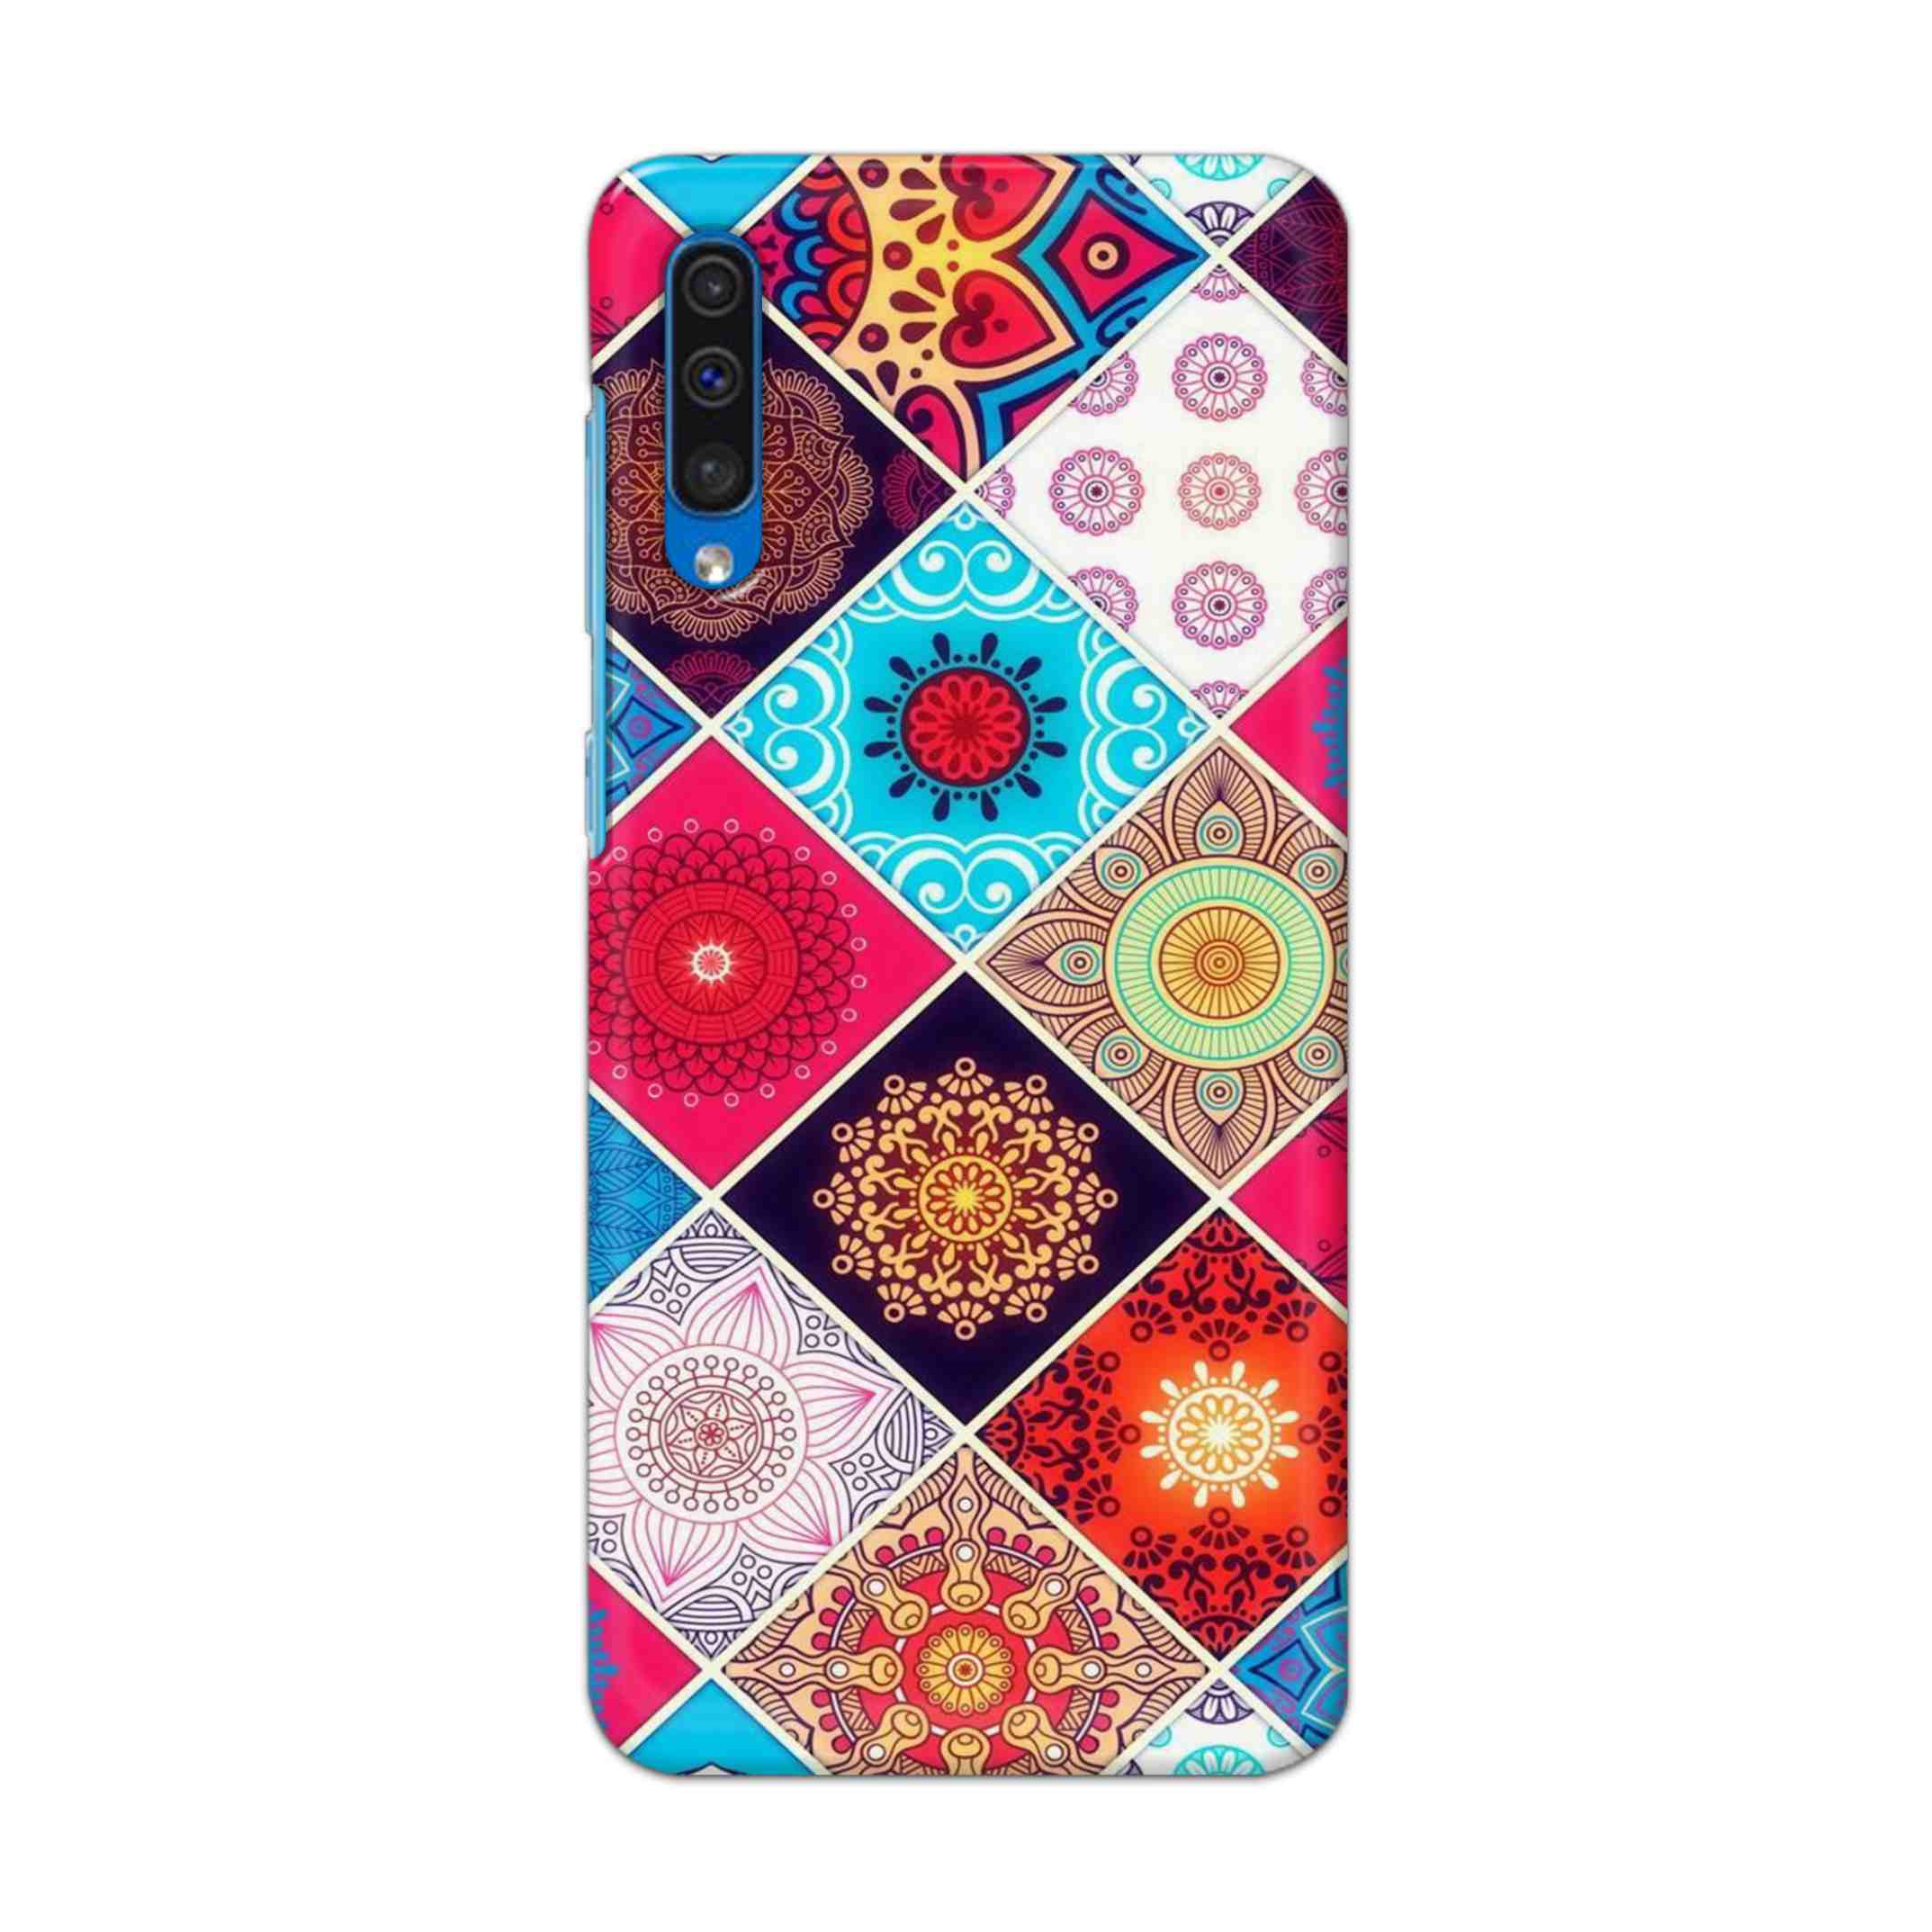 Buy Rainbow Mandala Hard Back Mobile Phone Case Cover For Samsung Galaxy A50 / A50s / A30s Online